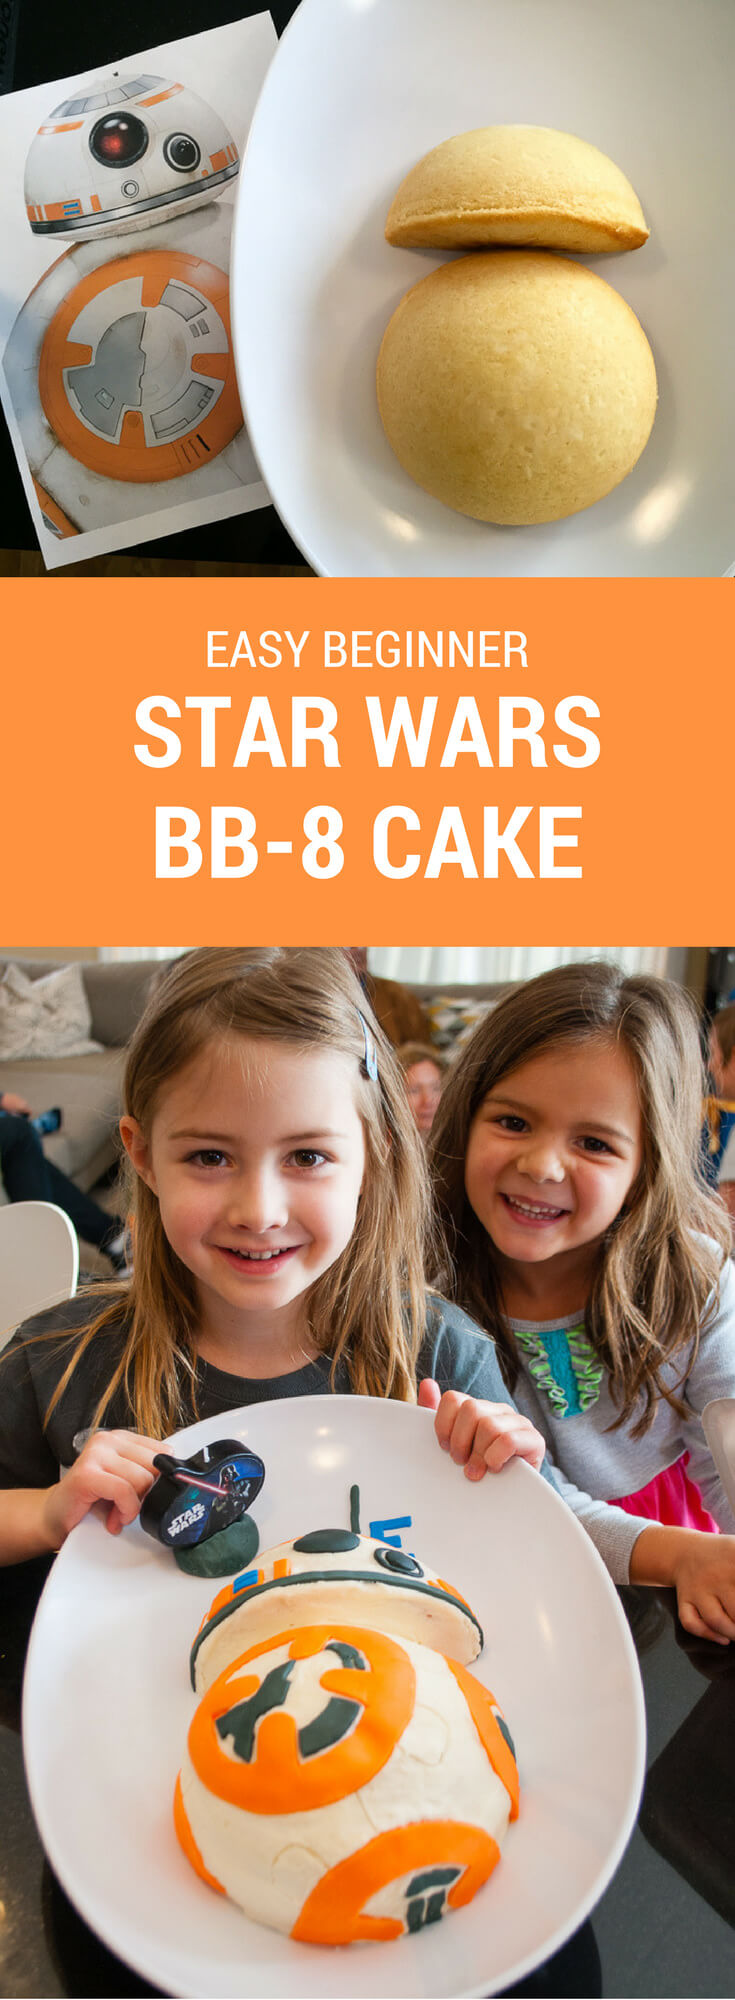 How to make an easy Star Wars BB-8 birthday cake